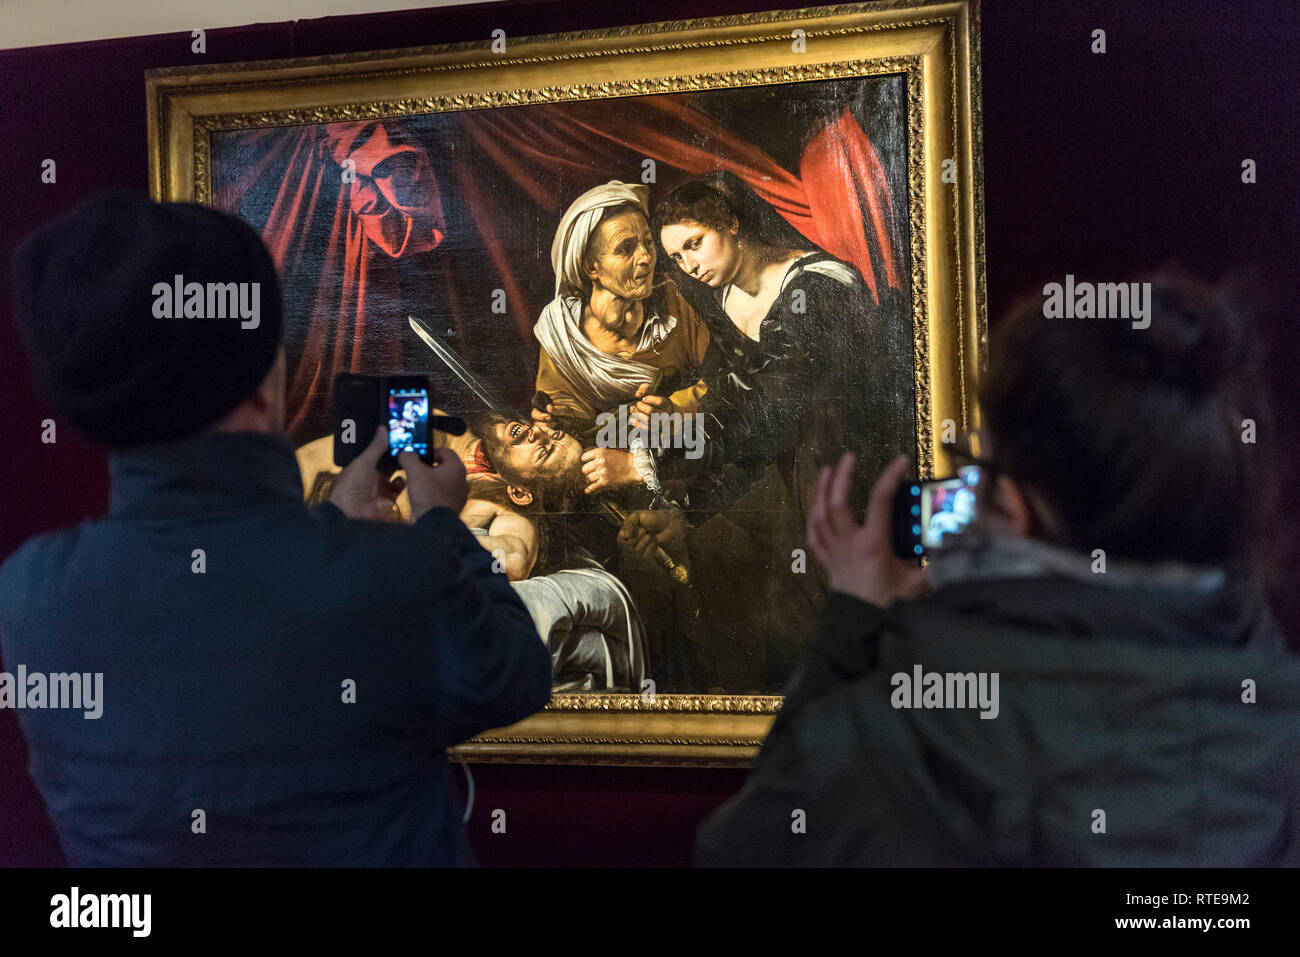 London,UK.  1 March 2019.  The painting known as 'Judith and Holfernes', c1607, by Caravaggio, is seen on display to the public for the first time after being discovered in an attic in Toulouse, France five years ago where it had lain forgotten for 100 years.  being exhibited at the Colnaghi Gallery in London, will be shown in Paris, New York and Toulouse, before being auctioned in Toulouse on 27 June 2019.  As is customary in France, no reserve has been placed on the artwork, but it has been reported that the painting may sell for in excess of £120m. Credit: Stephen Chung/Alamy Live News Stock Photo